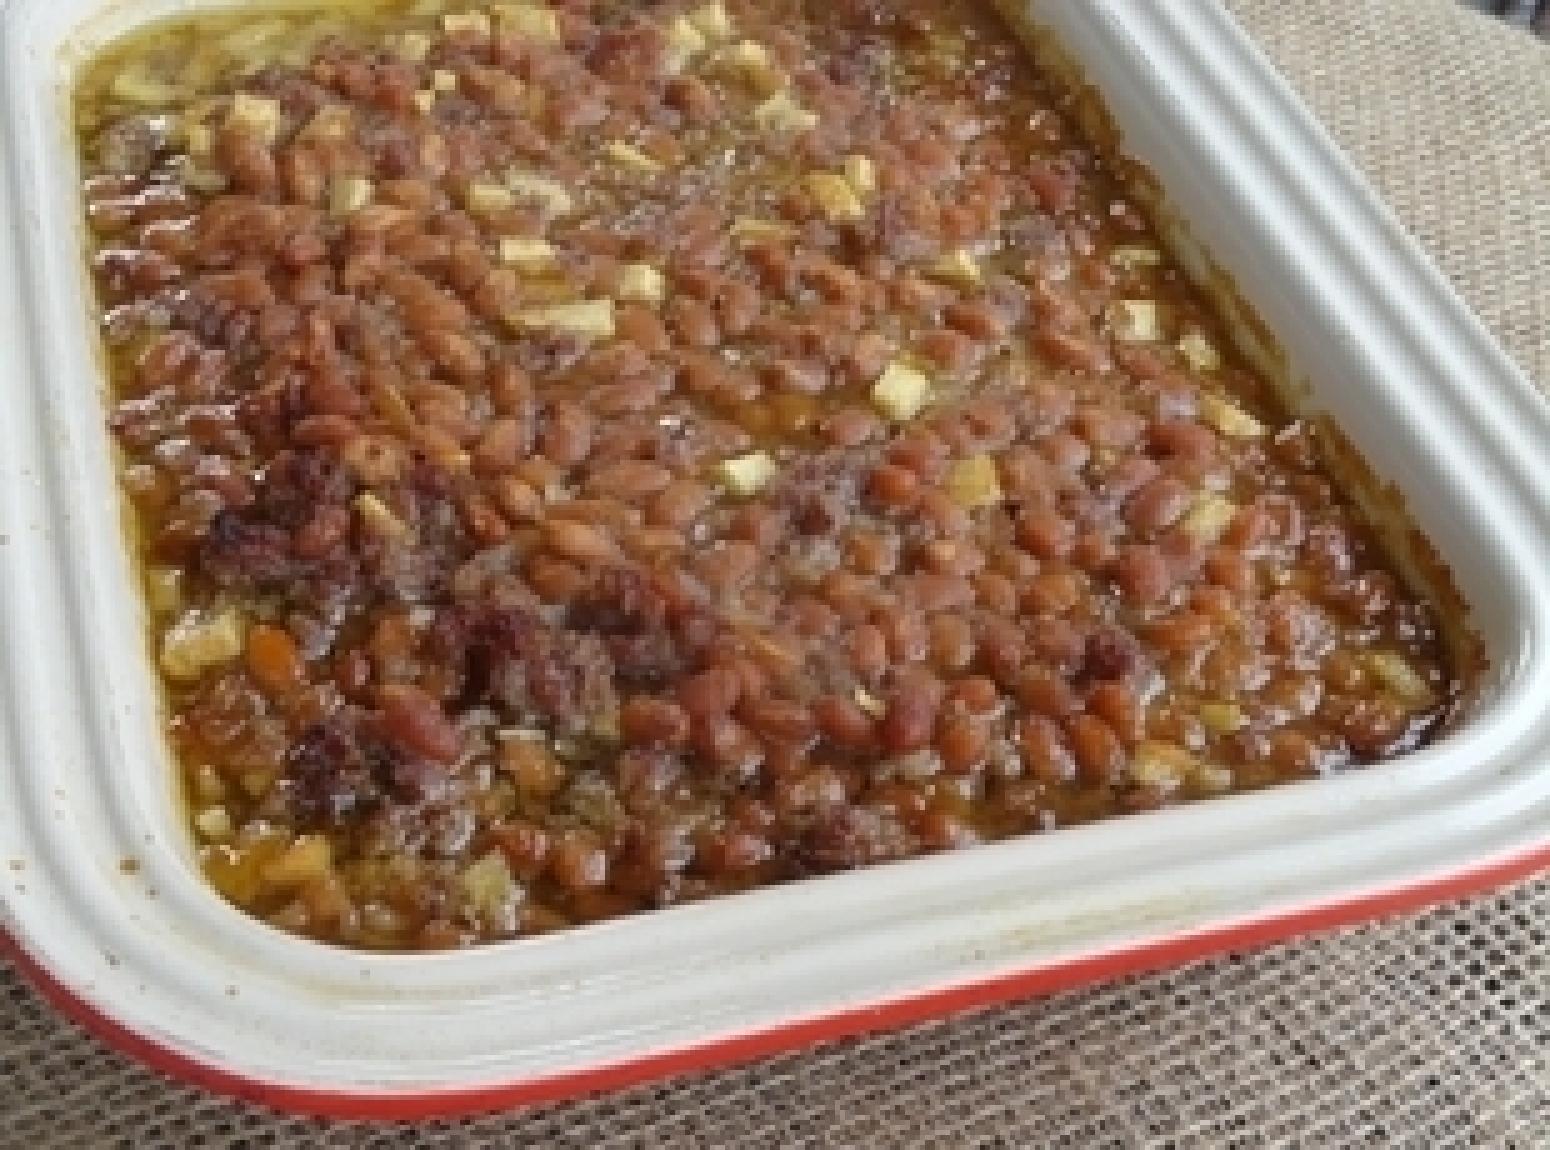 Spicy Apple Baked Beans